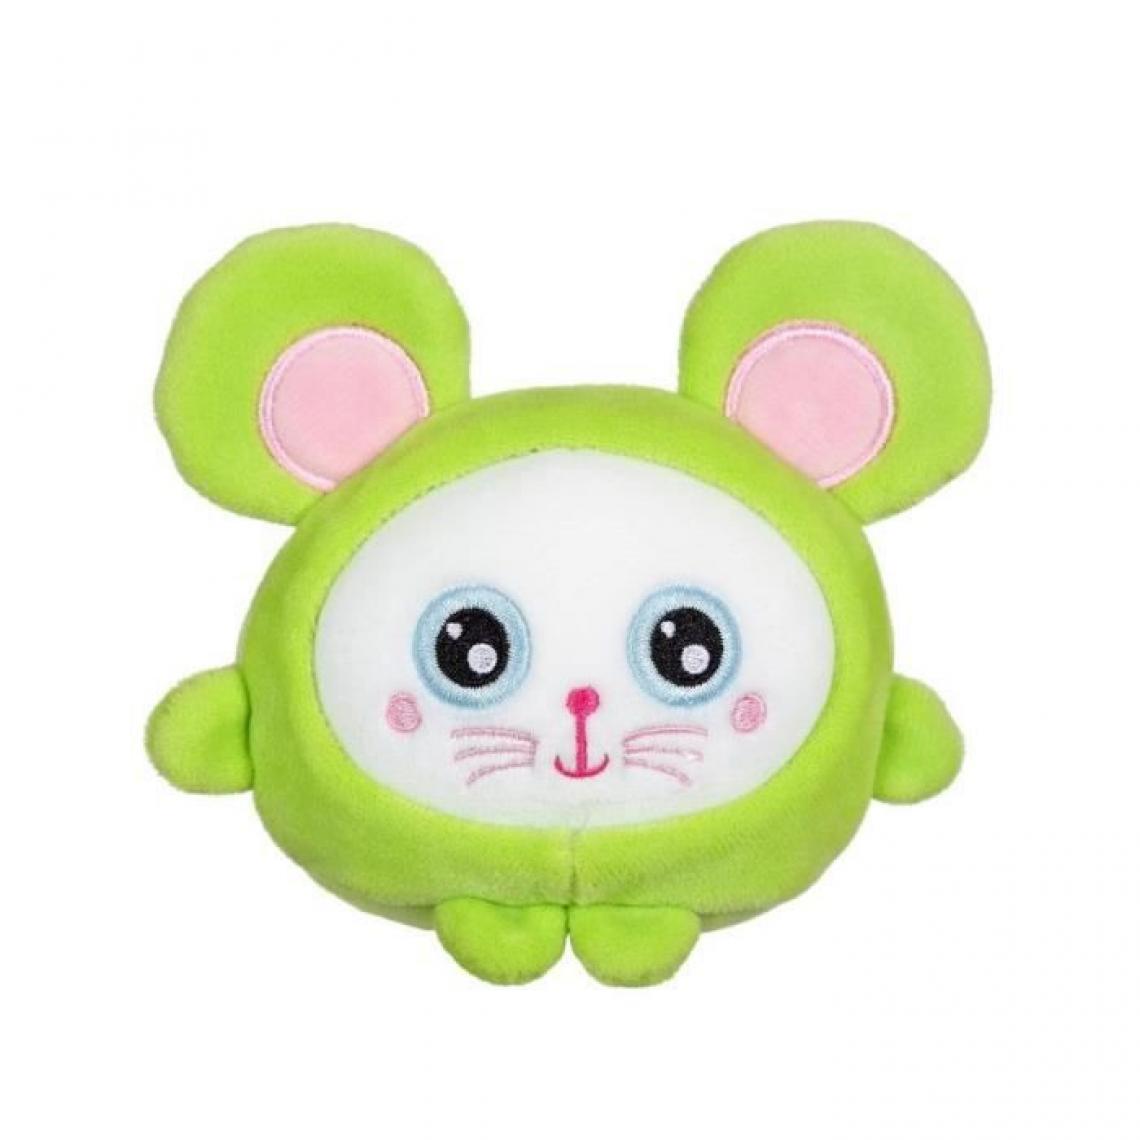 Gipsy - GIPSY TOYS Squishimals 10 cm souris verte Squeeky - Ours en peluche